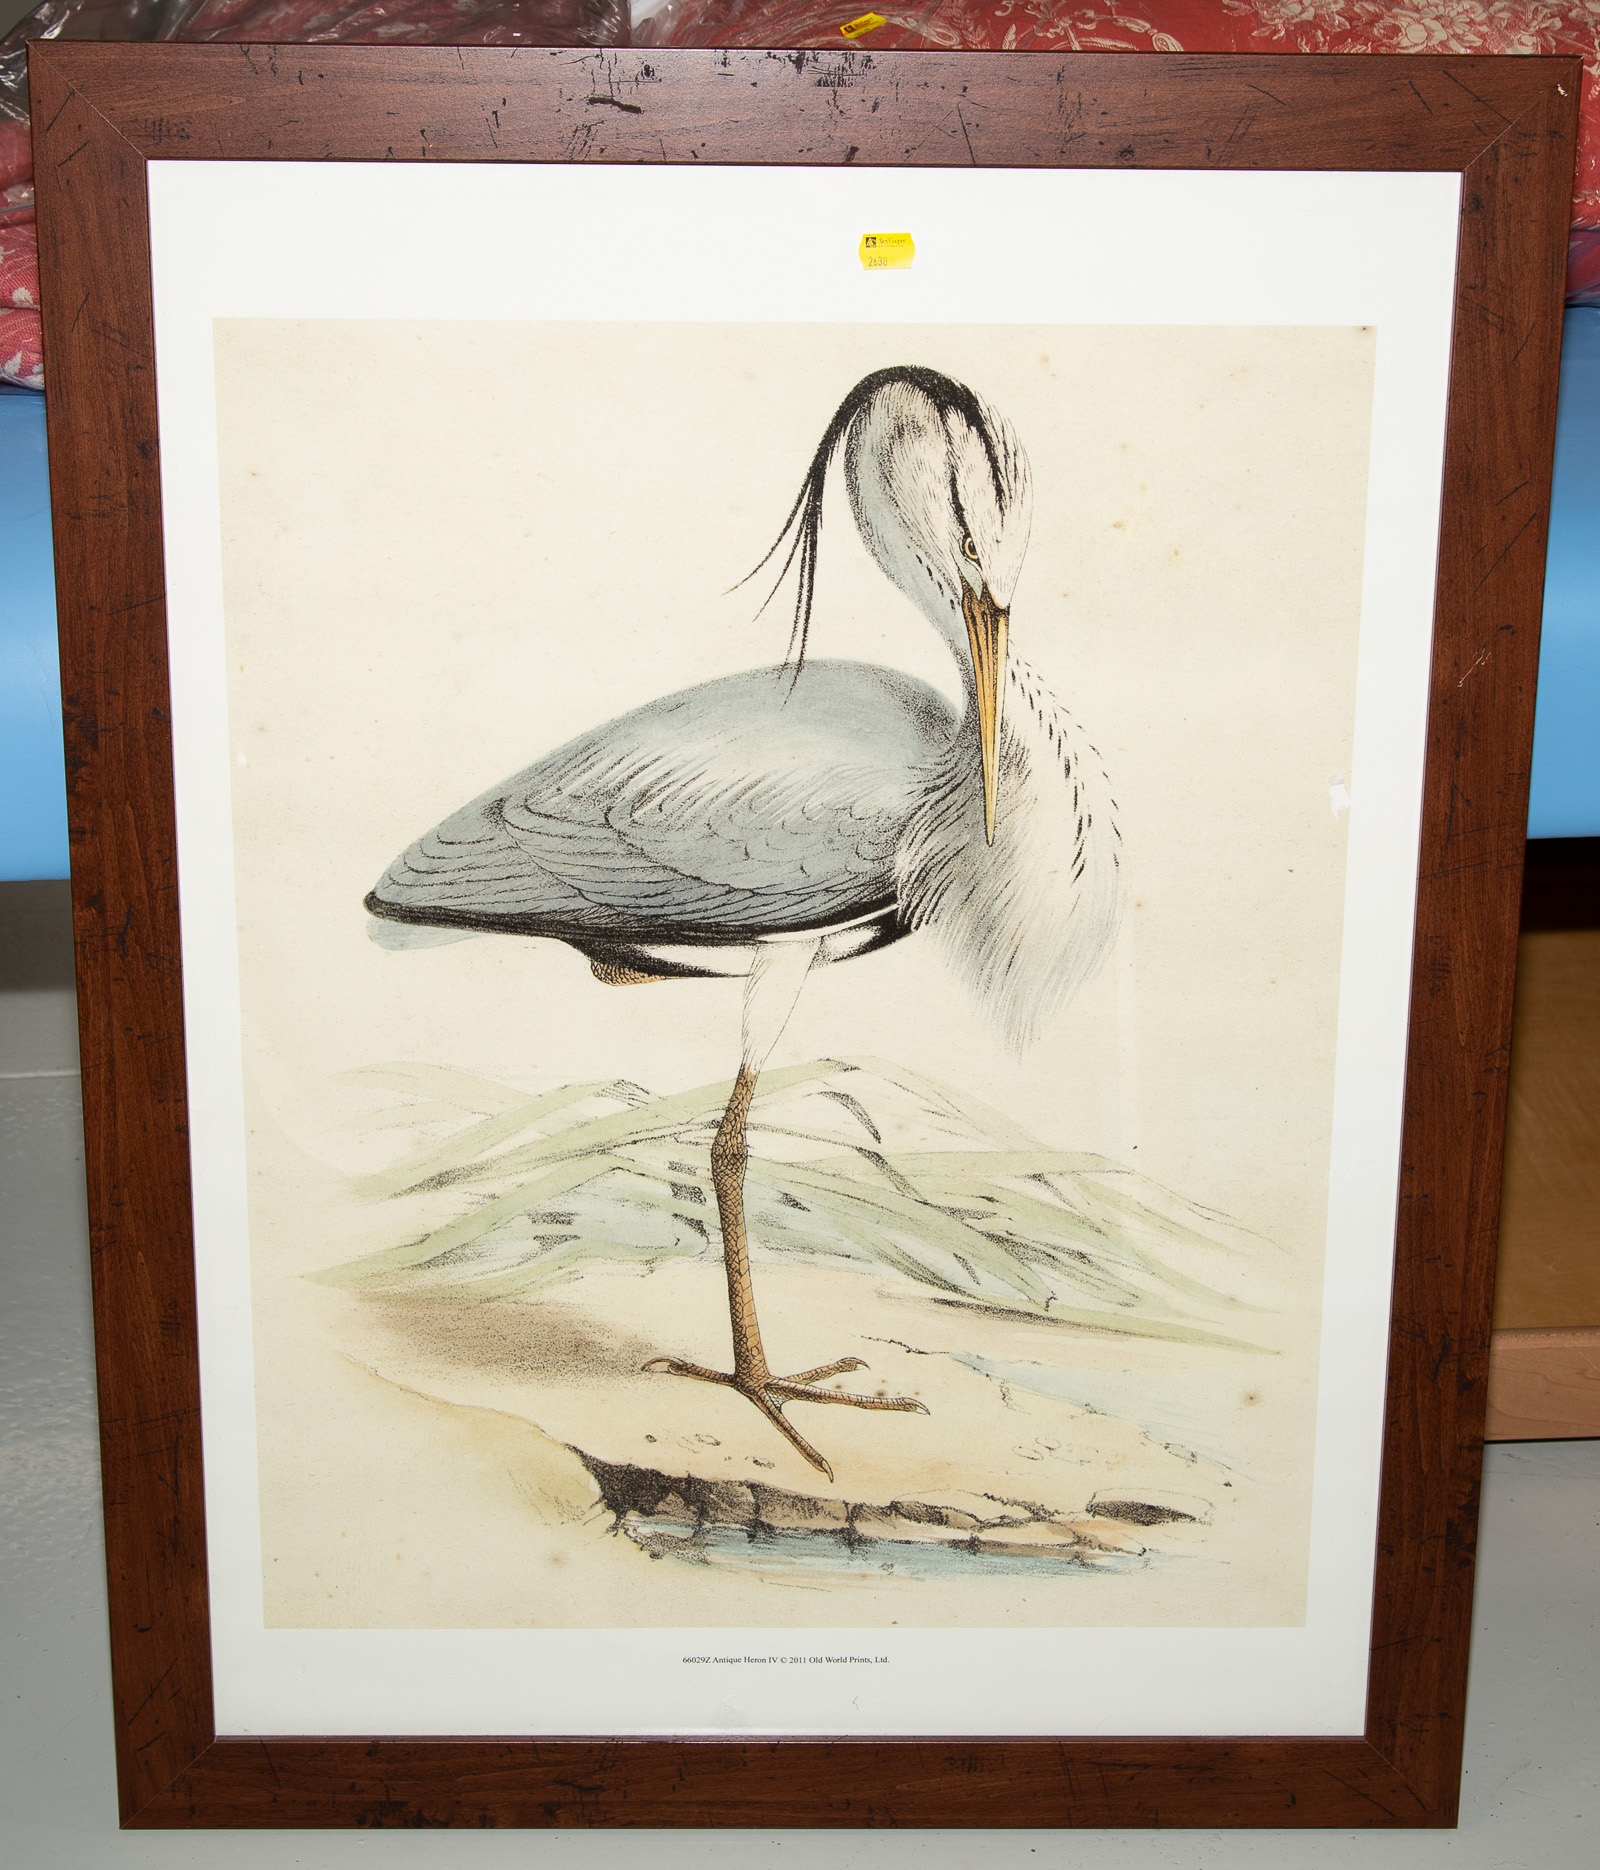 FRAMED REPRODUCTION PRINT OF A 3352d1